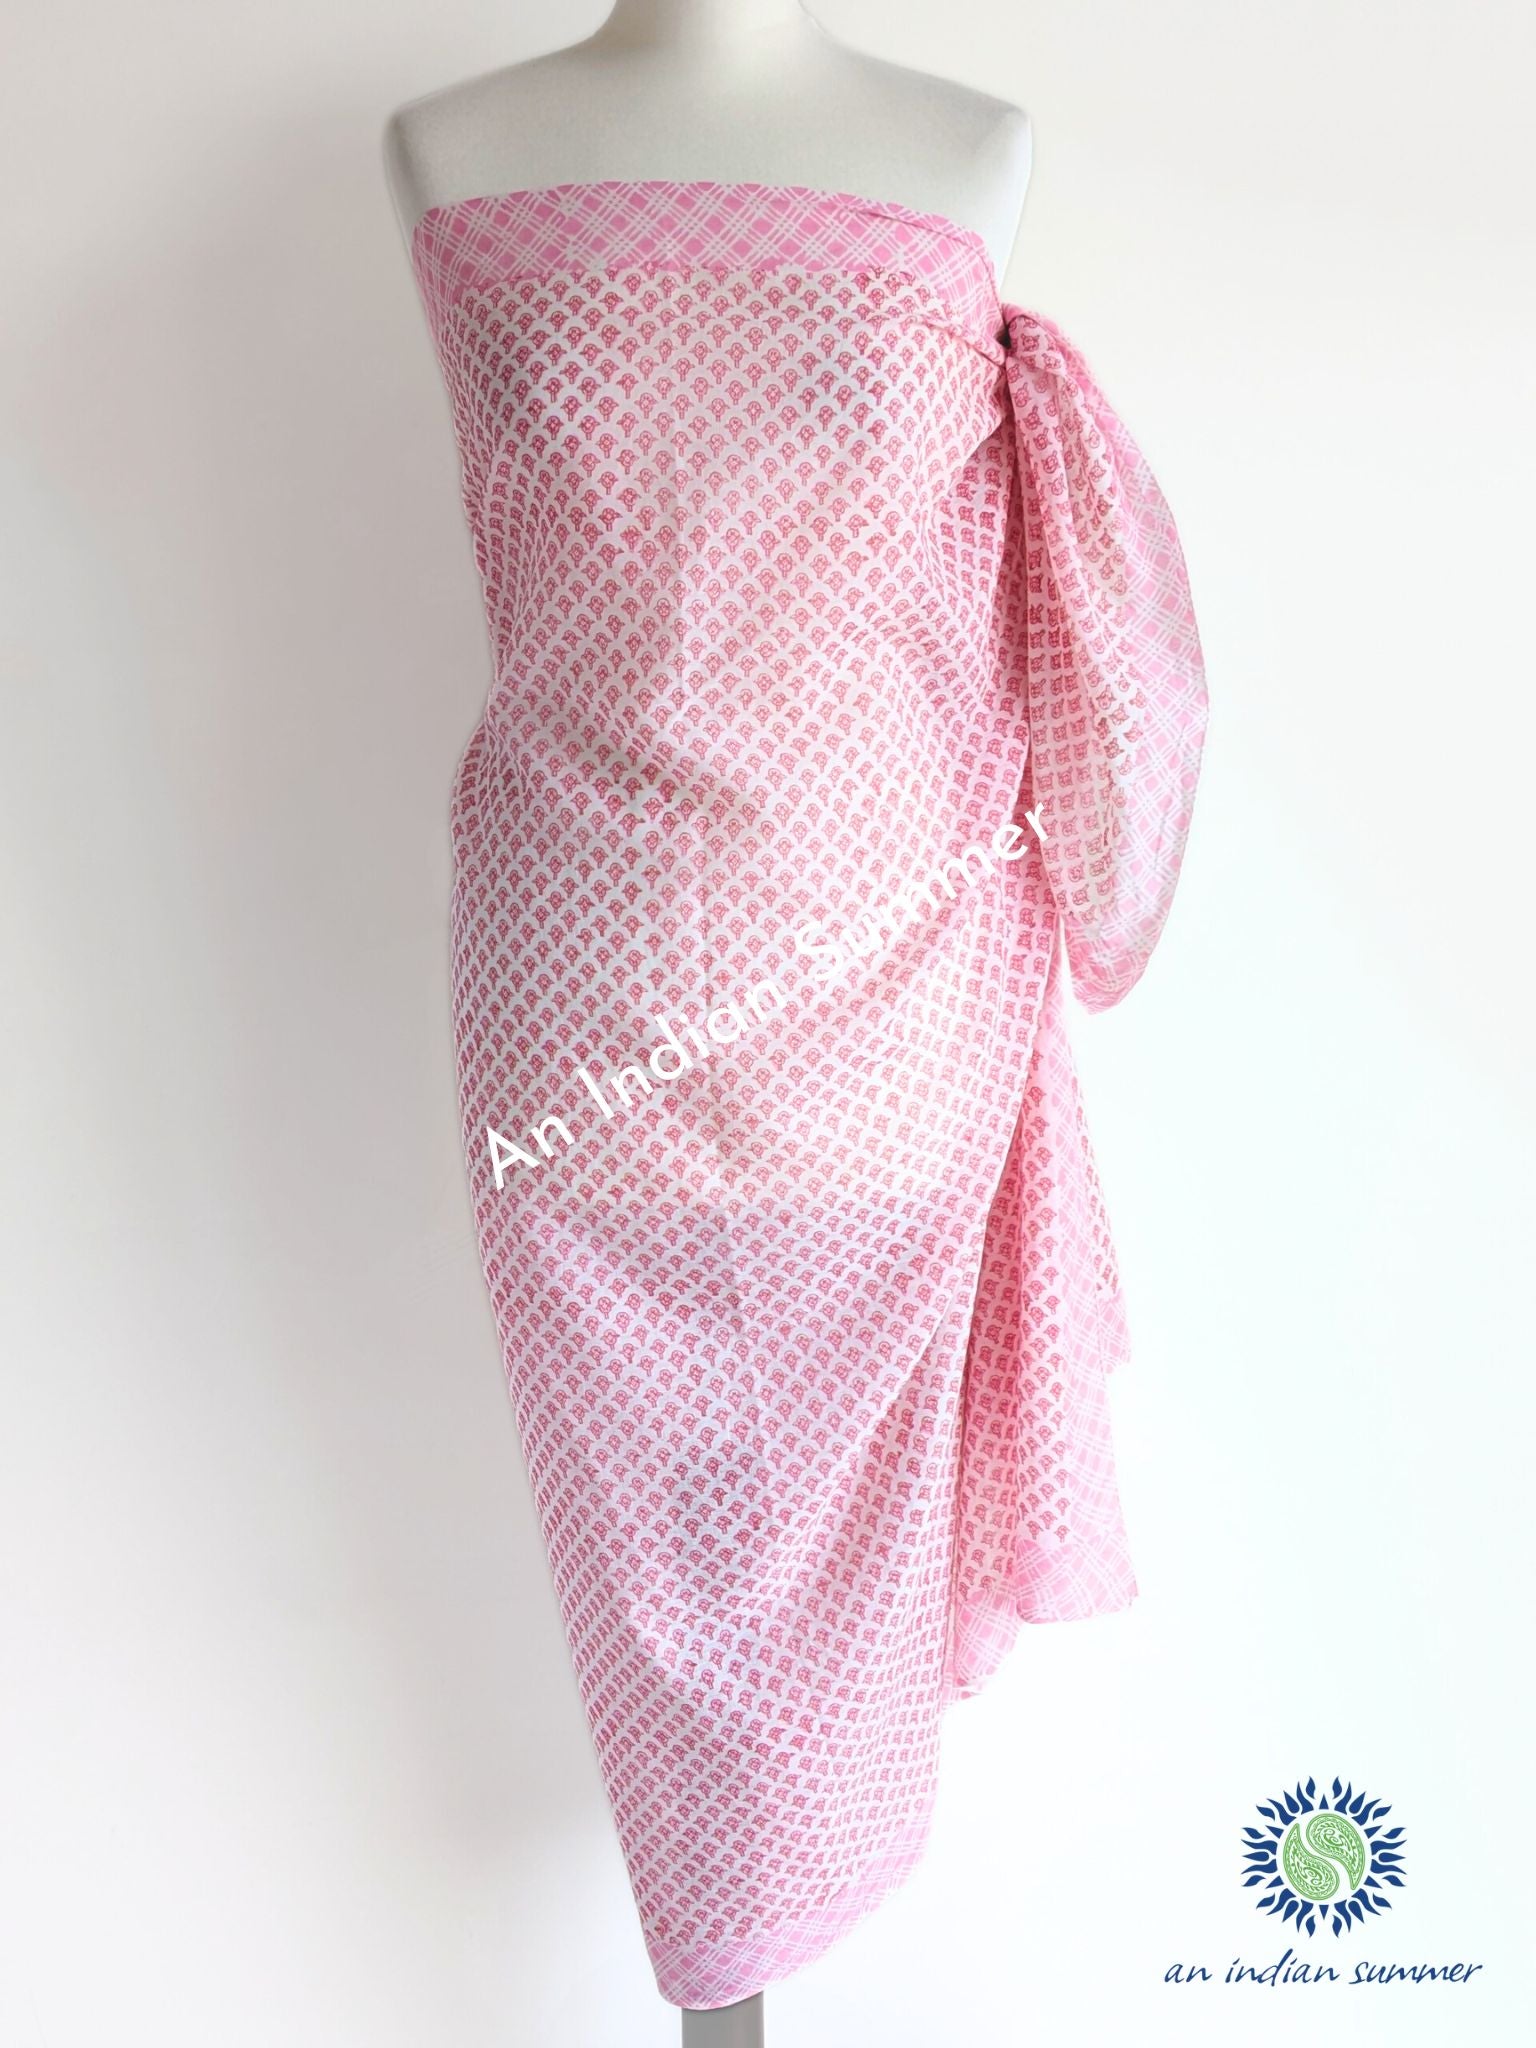 Zinnia Sarong Pareo | Pink | Hand Block Printed | Soft Cotton Voile | An Indian Summer | Seasonless Timeless Sustainable Ethical Authentic Artisan Conscious Clothing Lifestyle Brand